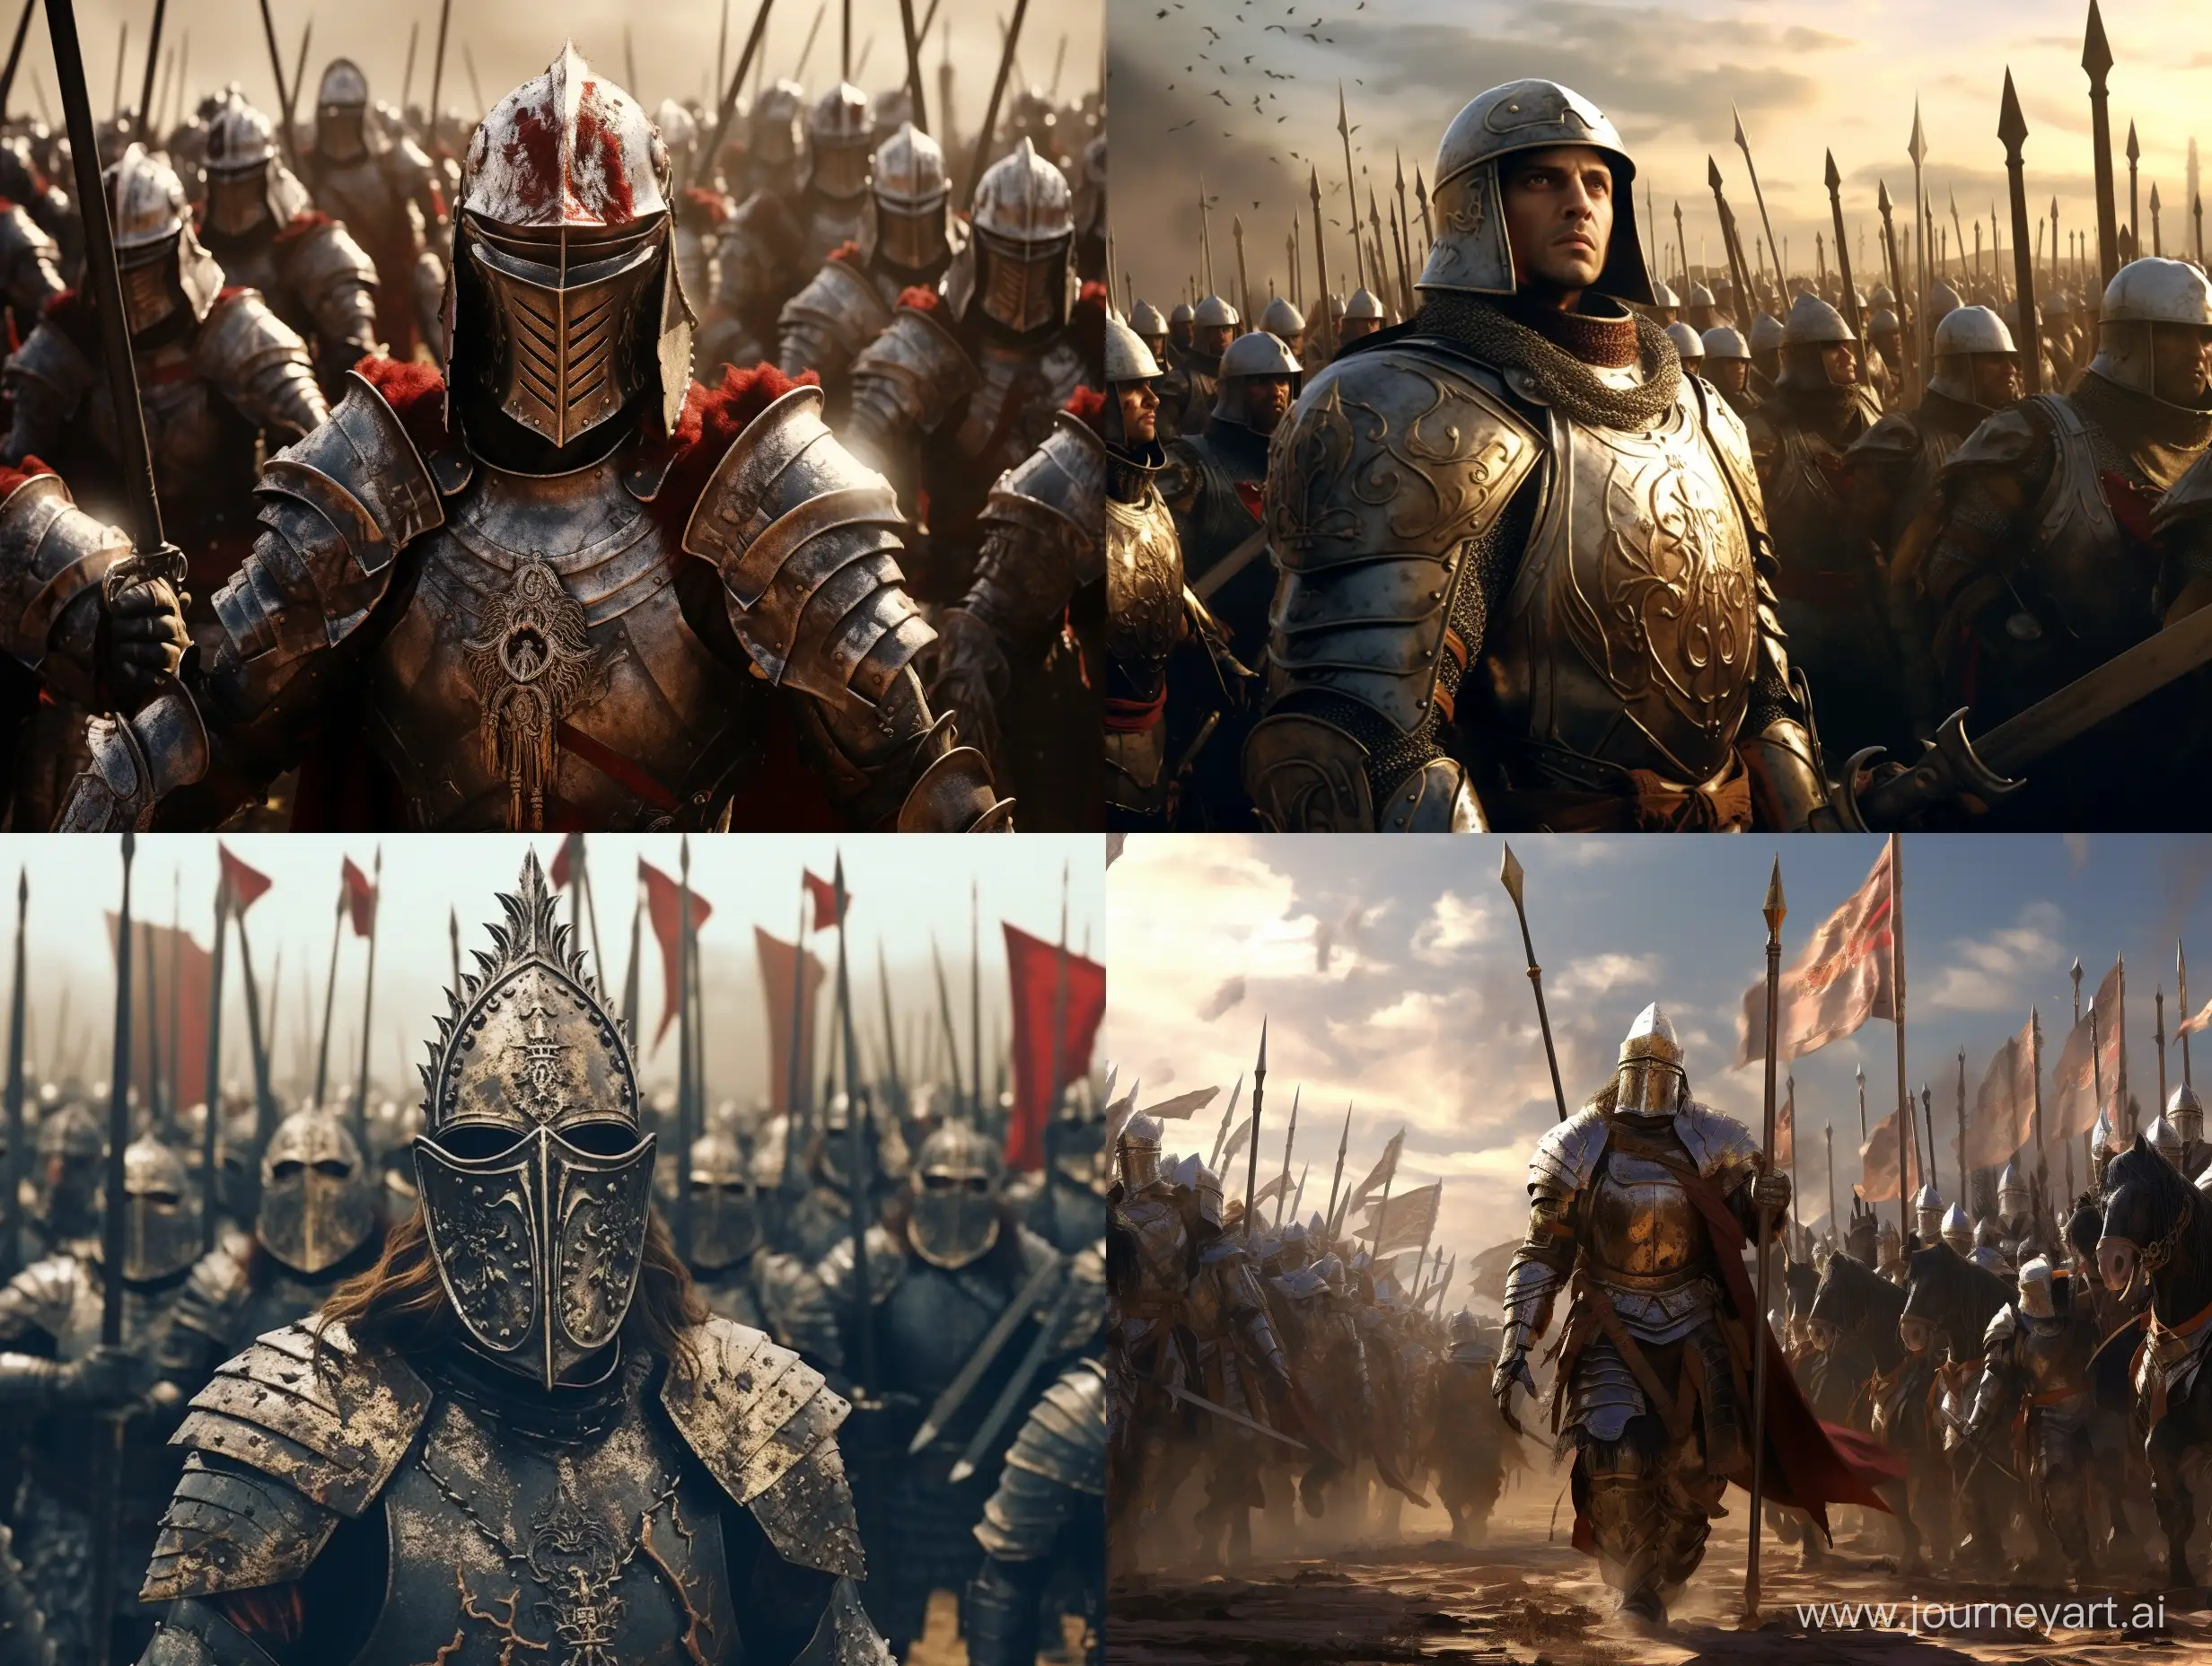 Medieval-Army-Marching-in-a-Historic-Landscape